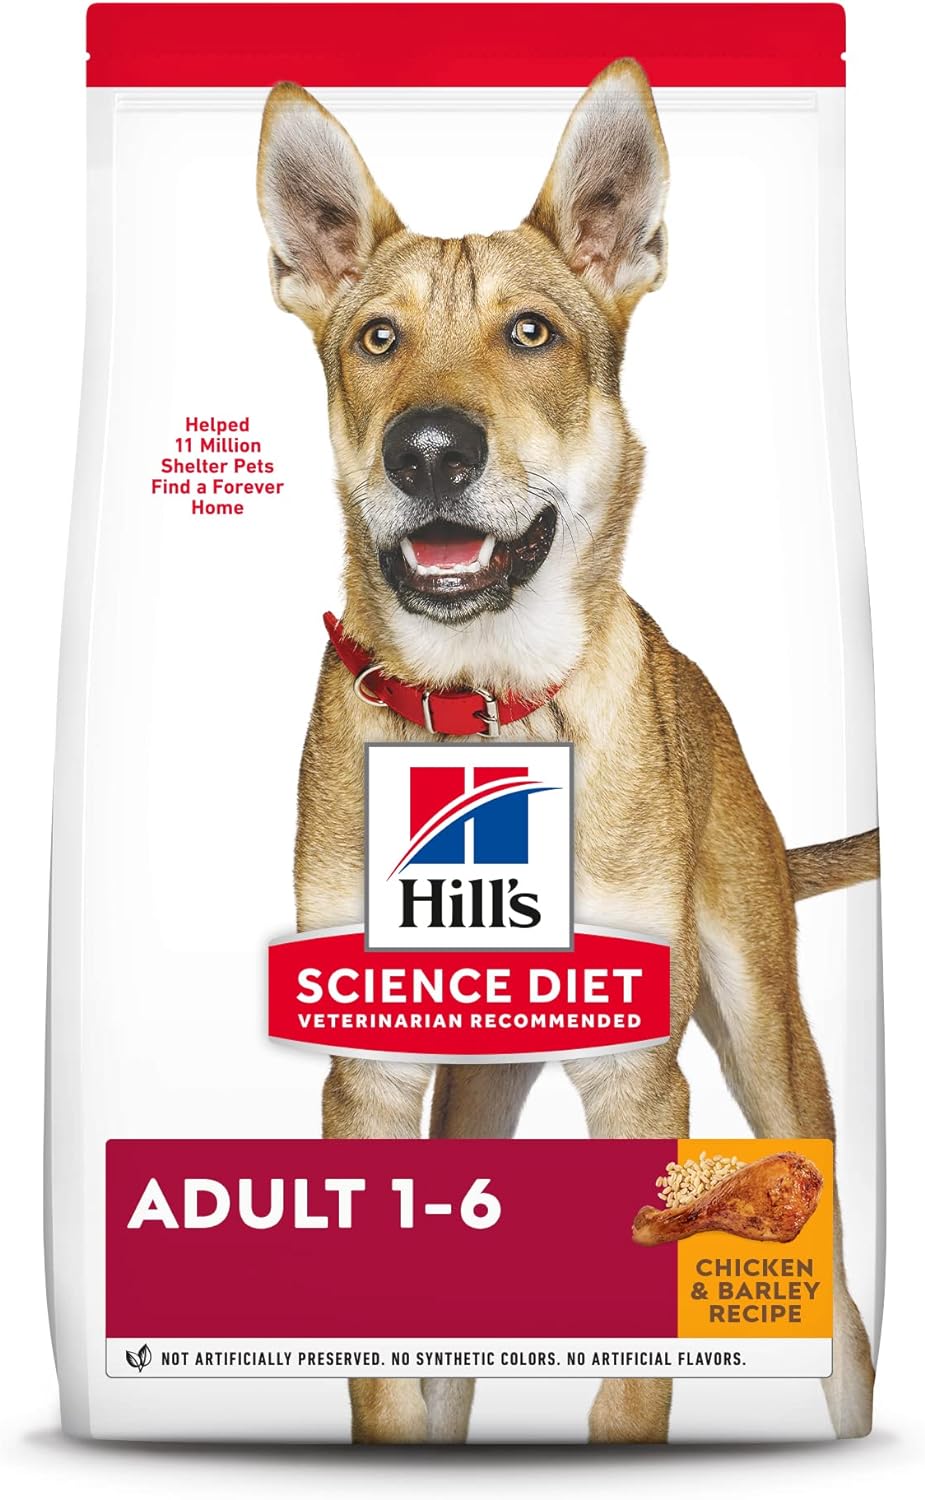 Hill’s Science Diet Adult 1-6 Chicken & Barley Recipe Dry Dog Food – Gallery Image 1